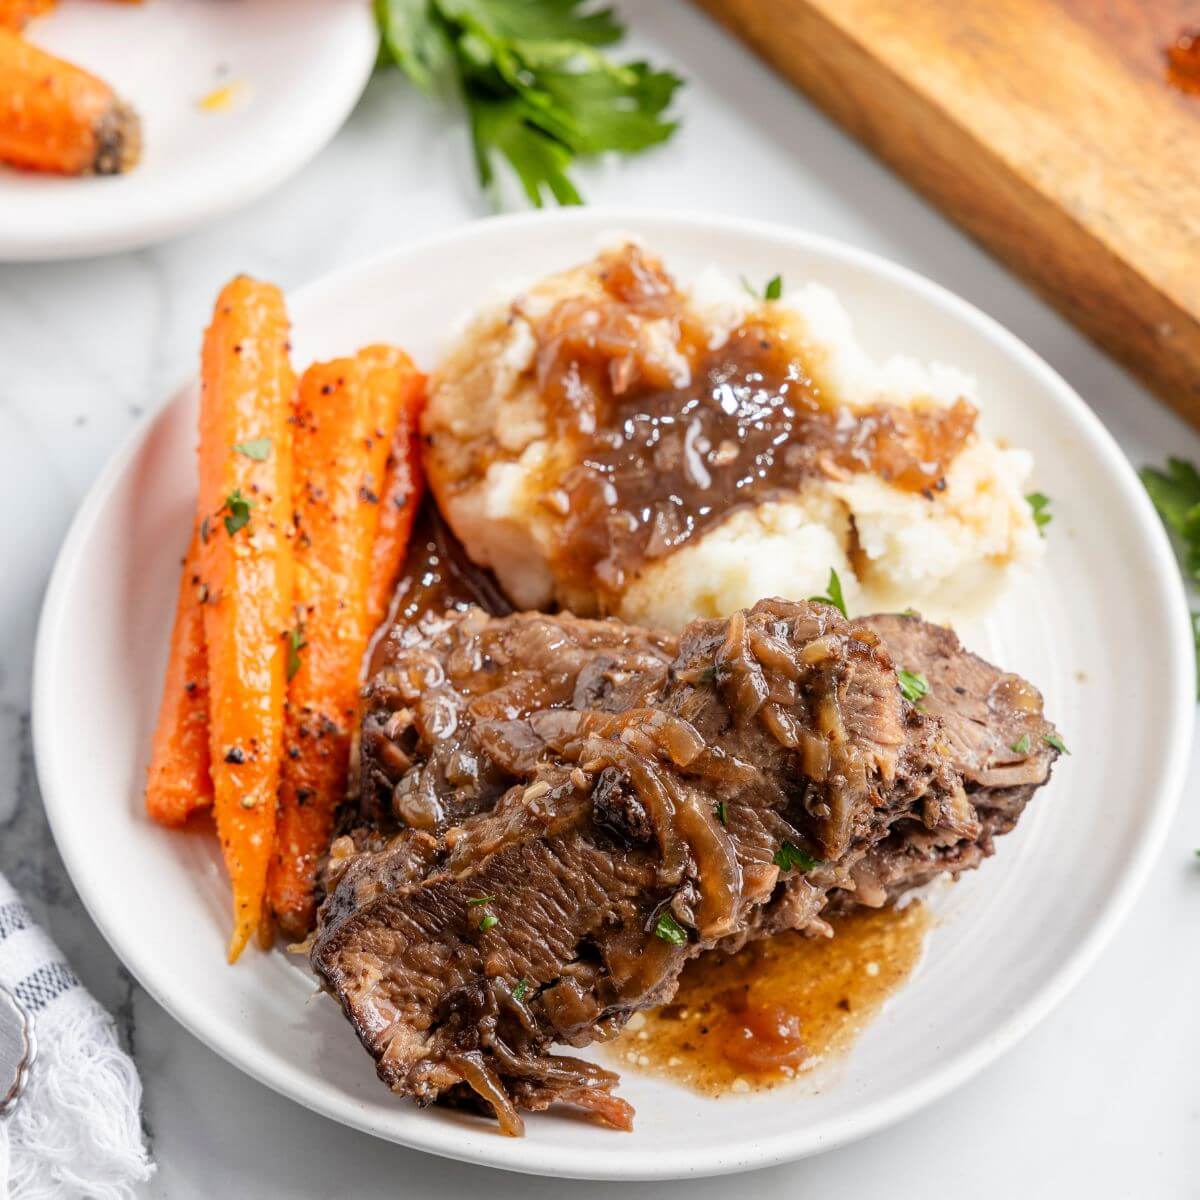 Brisket is served on a plate with mashed potatoes and gravy and carrots.